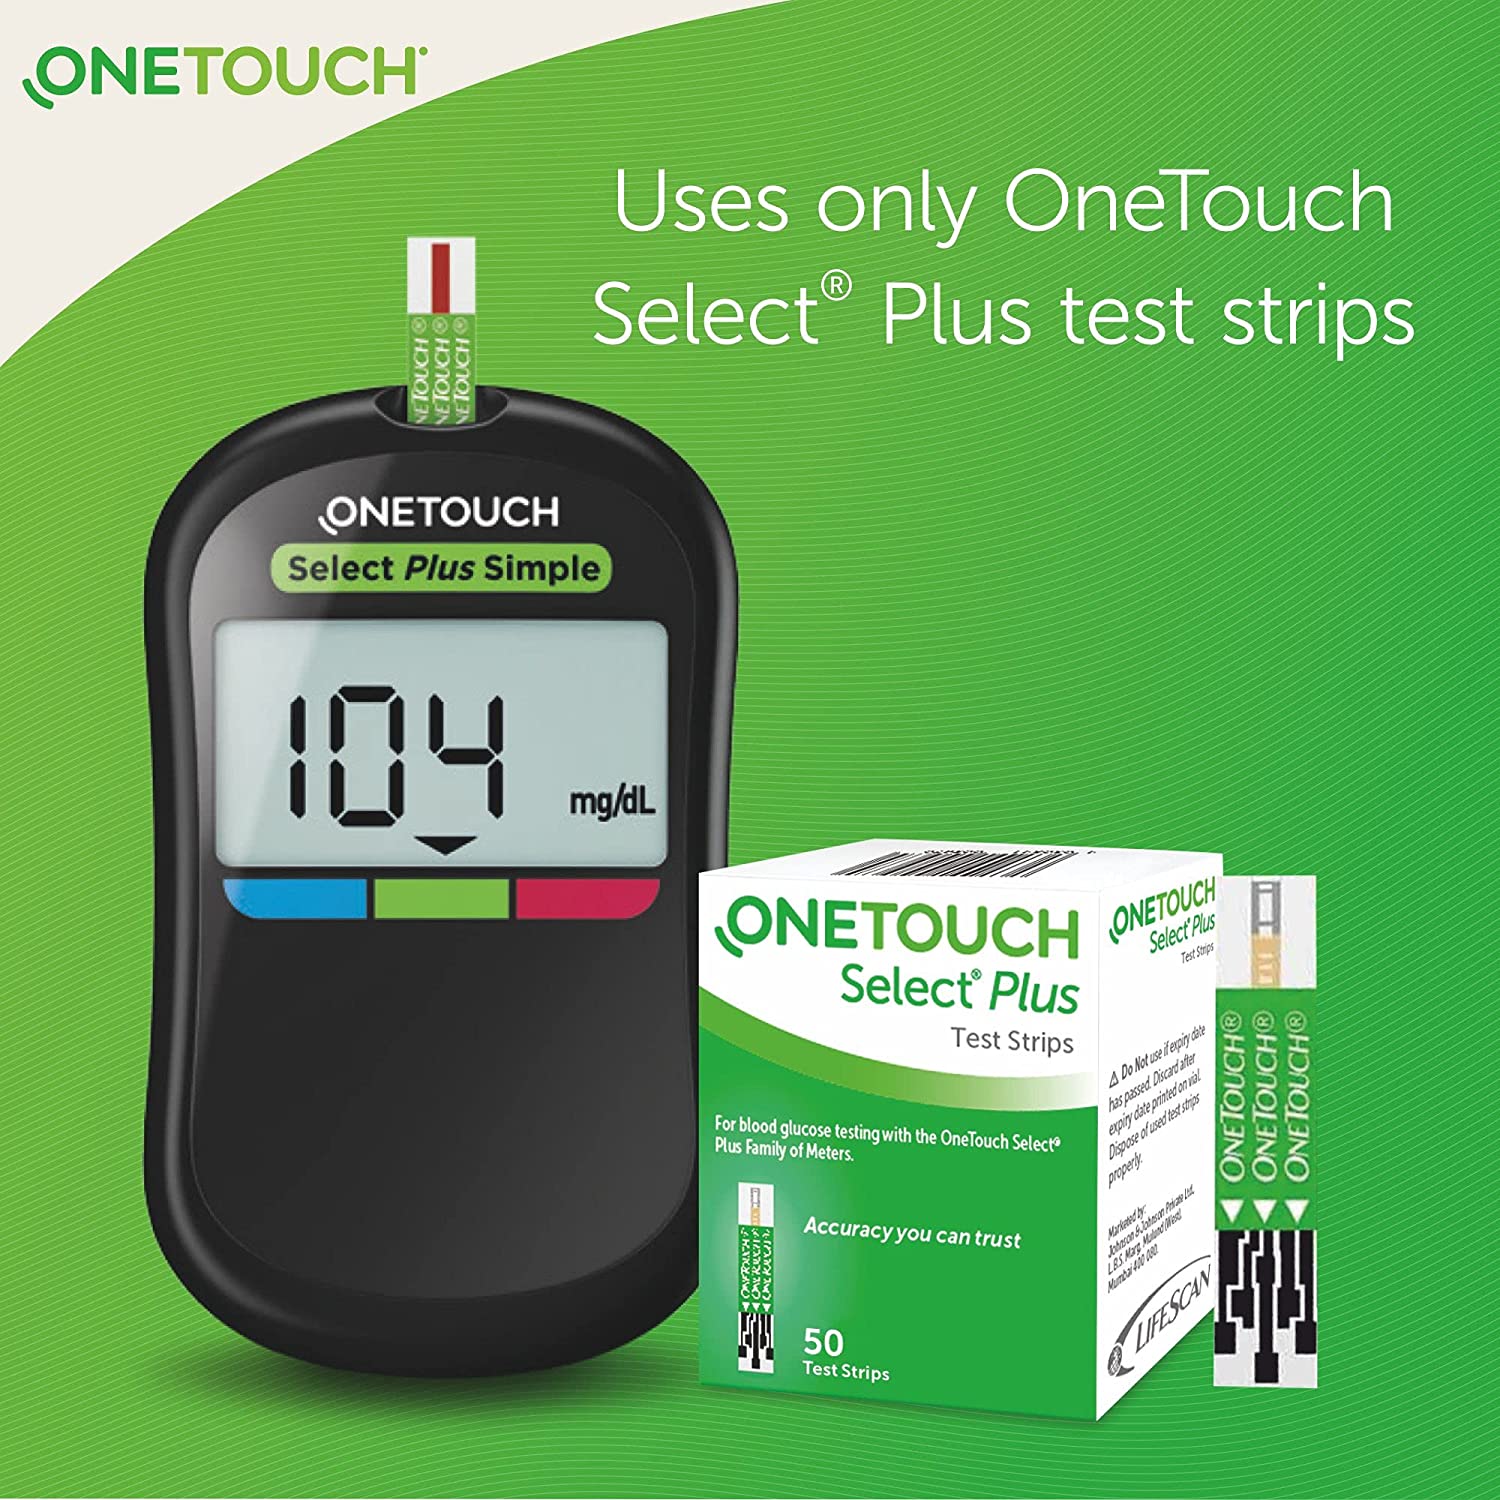 OneTouch Select Plus Simple glucometer machine | FREE 10 Test Strips +10 Sterile Lancets + 1 Lancing device | Simple & accurate testing of Blood sugar levels at home | Global Iconic Brand